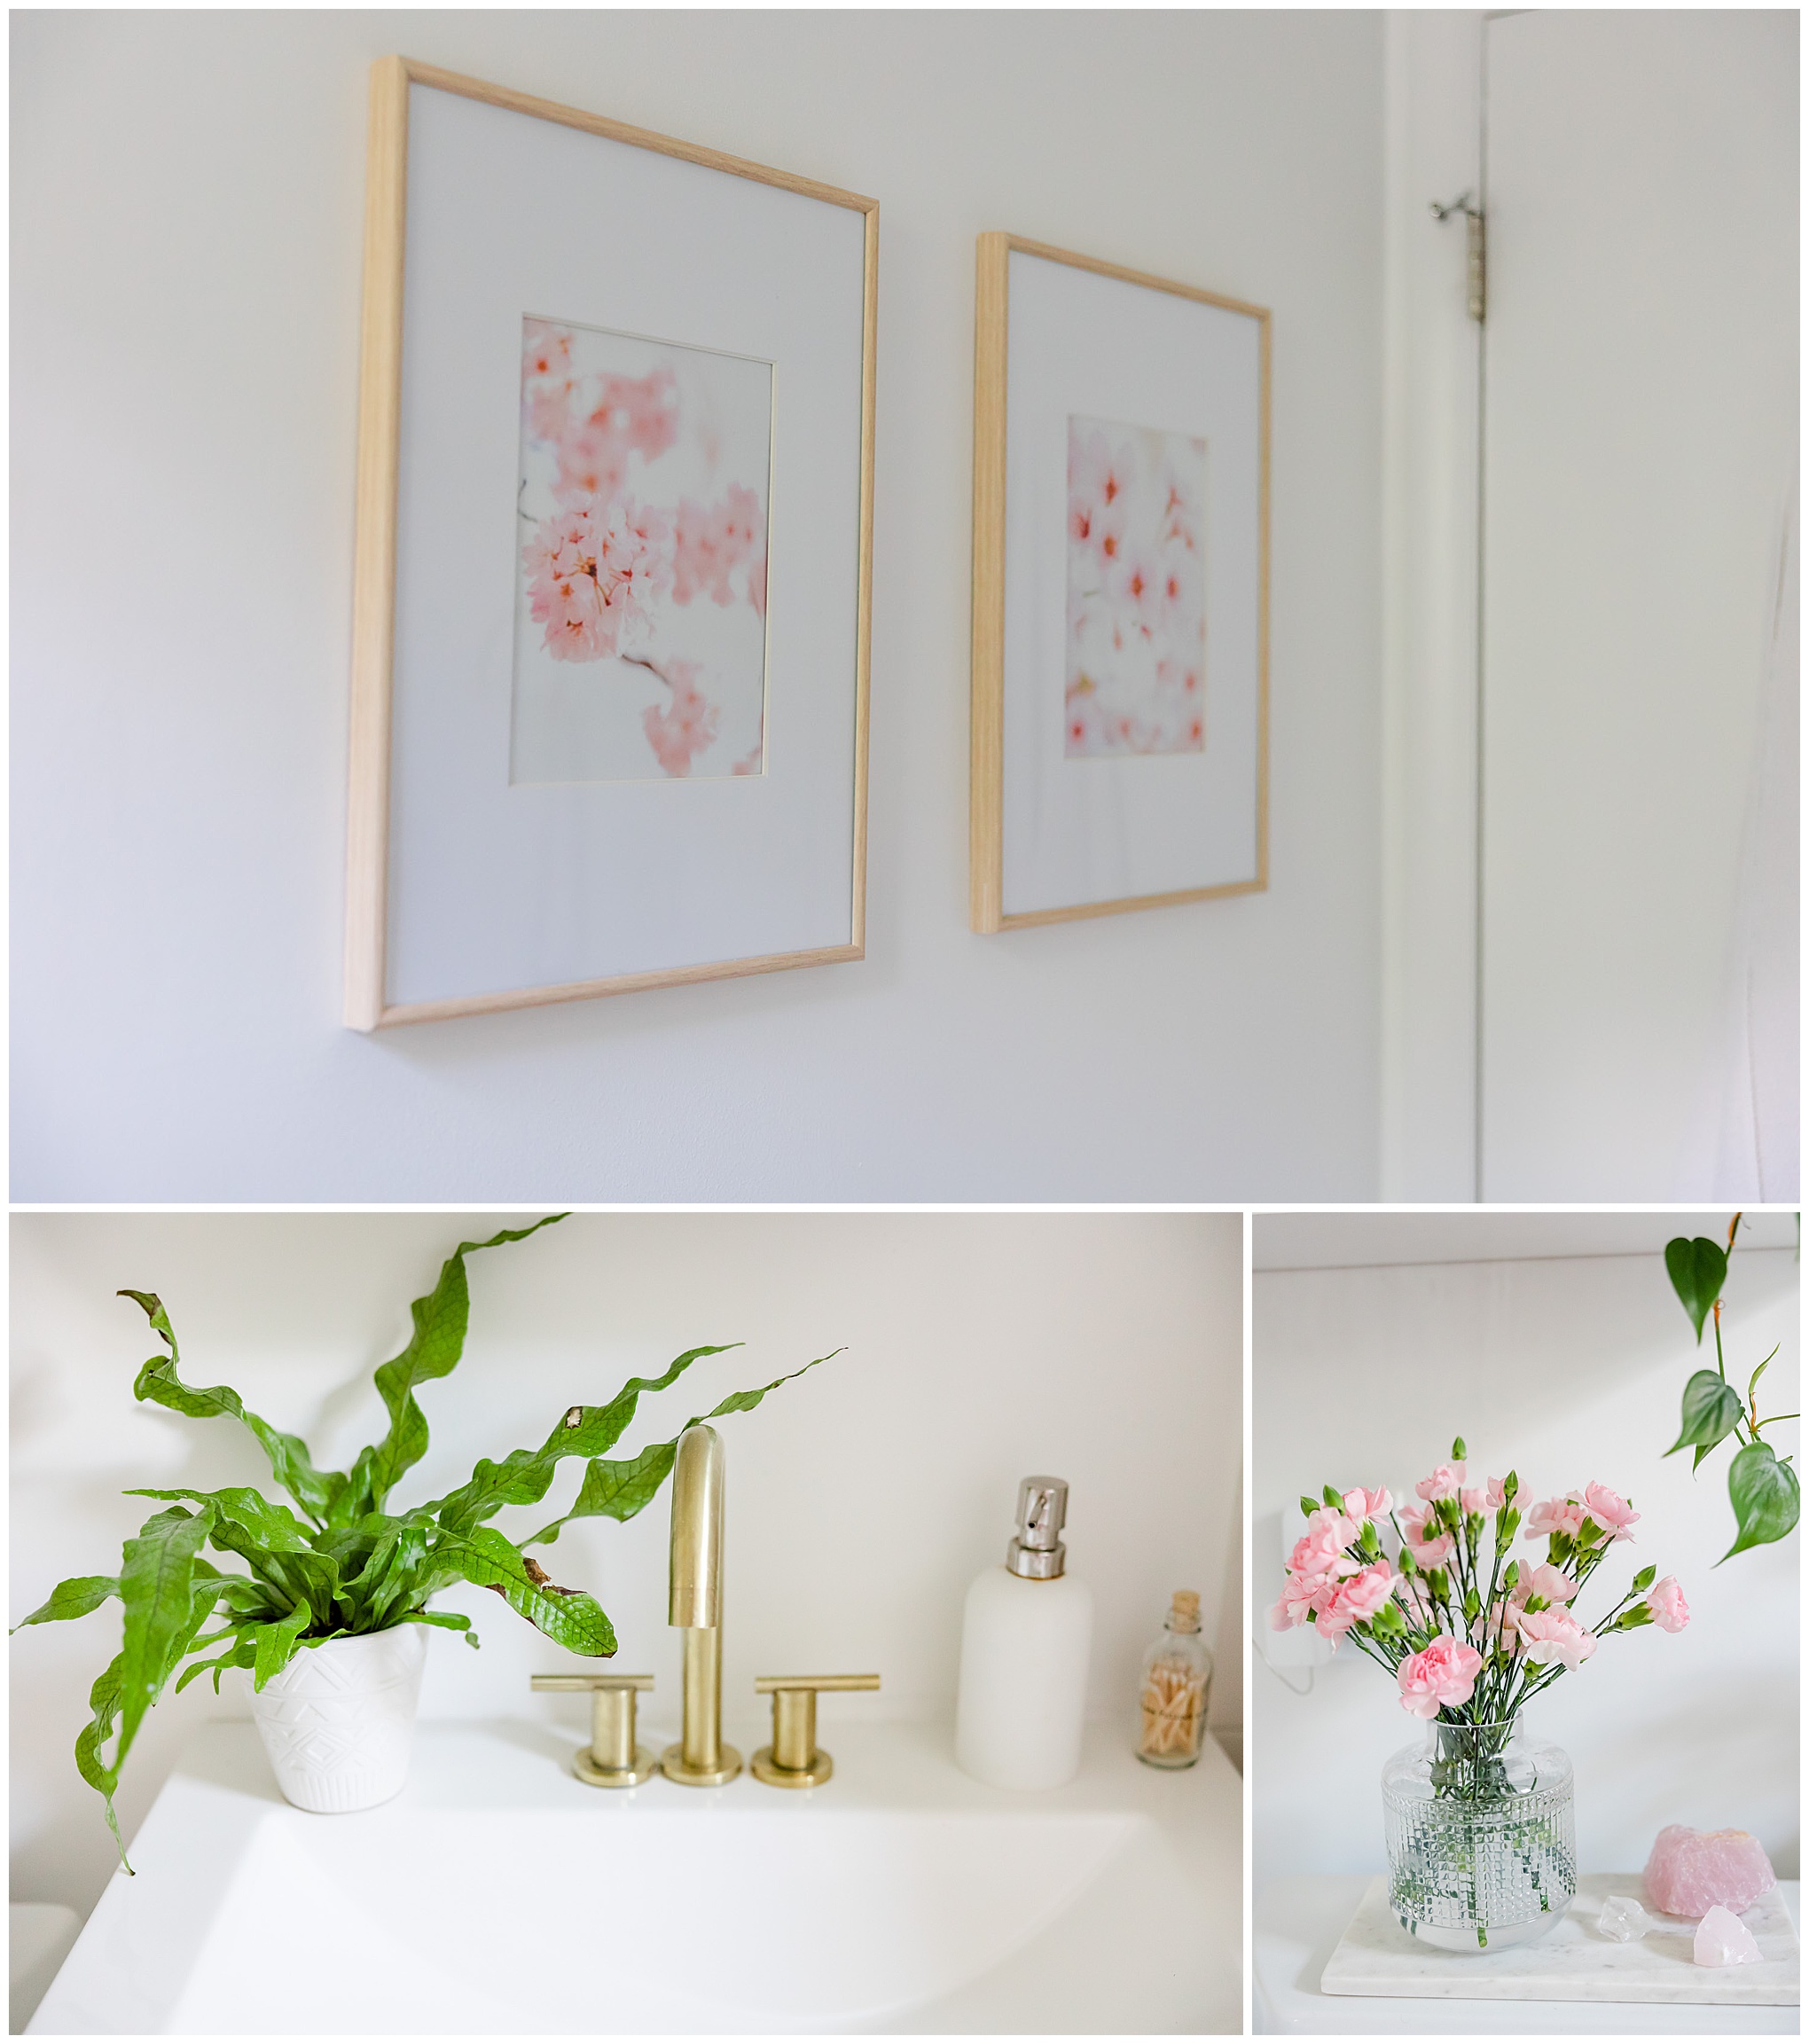 cherry blossoms bathroom inspiration, apartment tour, bathroom decor, bedrooom decor, pink and gold aesthetic, blue aesthetic, photographer's apartment, photographer's life, photographer's aesthetic, Arlington condo living, apartment living, small bathroom decorating, minimalist decor, subtle beach decor, Rachel E.H. Photography, DC photographer, DC cherry blossoms photographer, print shop, cherry blossom prints, plant on sink, sink with gold fixtures